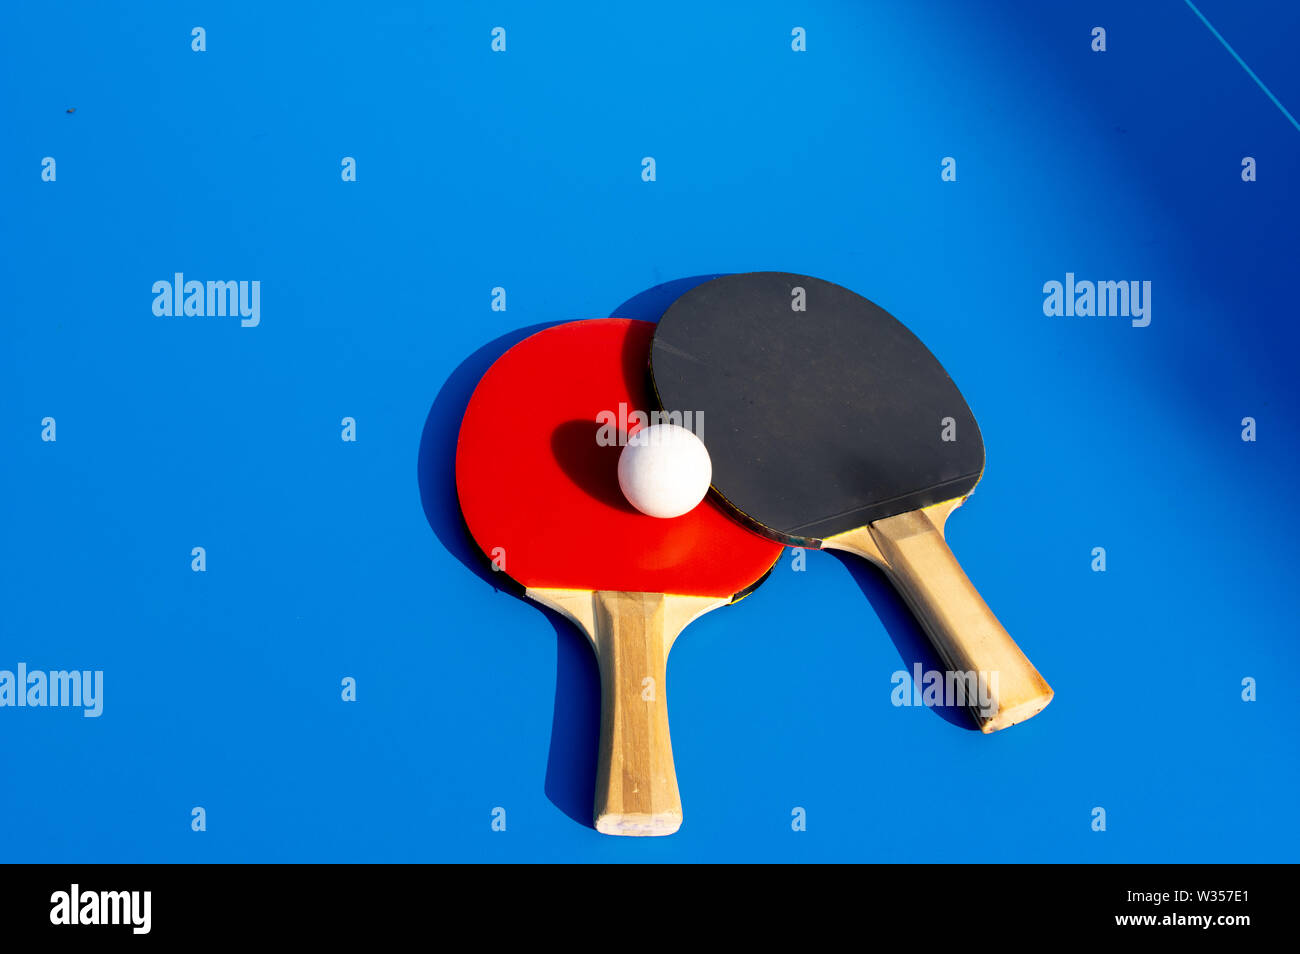 close up shot of two table tennis paddles with a ball on blue table Stock Photo